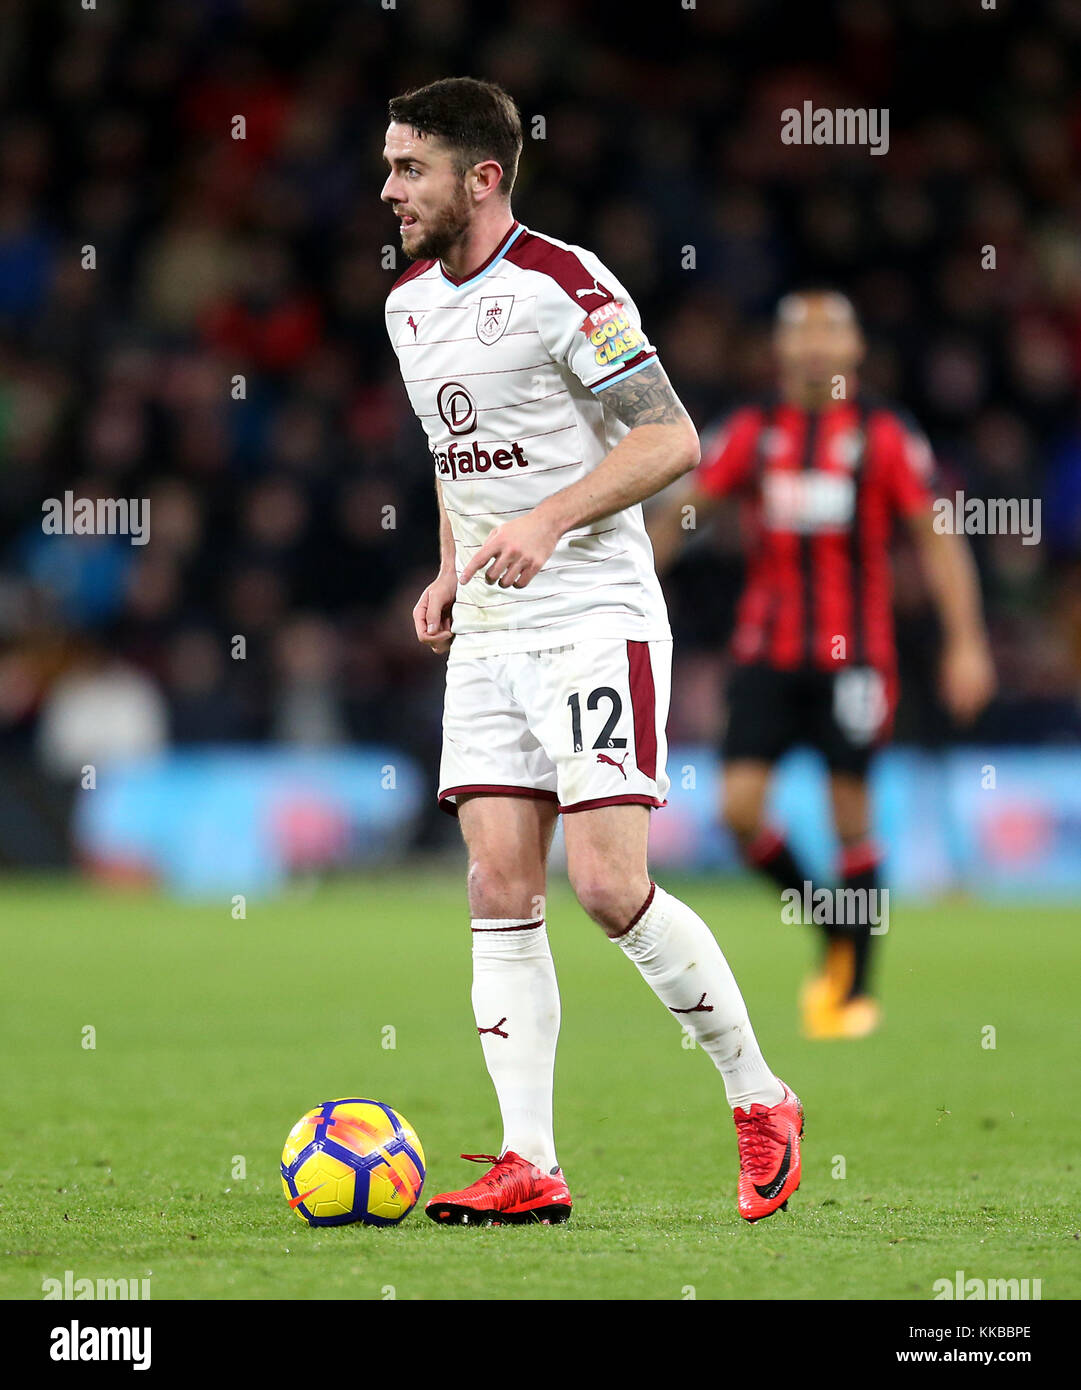 Burnley's Robbie Brady during the Premier League match at the Vitality Stadium, Bournemouth. PRESS ASSOCIATION Photo. Picture date: Wednesday November 29, 2017. See PA story SOCCER Bournemouth. Photo credit should read: Steven Paston/PA Wire. RESTRICTIONS: No use with unauthorised audio, video, data, fixture lists, club/league logos or 'live' services. Online in-match use limited to 75 images, no video emulation. No use in betting, games or single club/league/player publications. Stock Photo